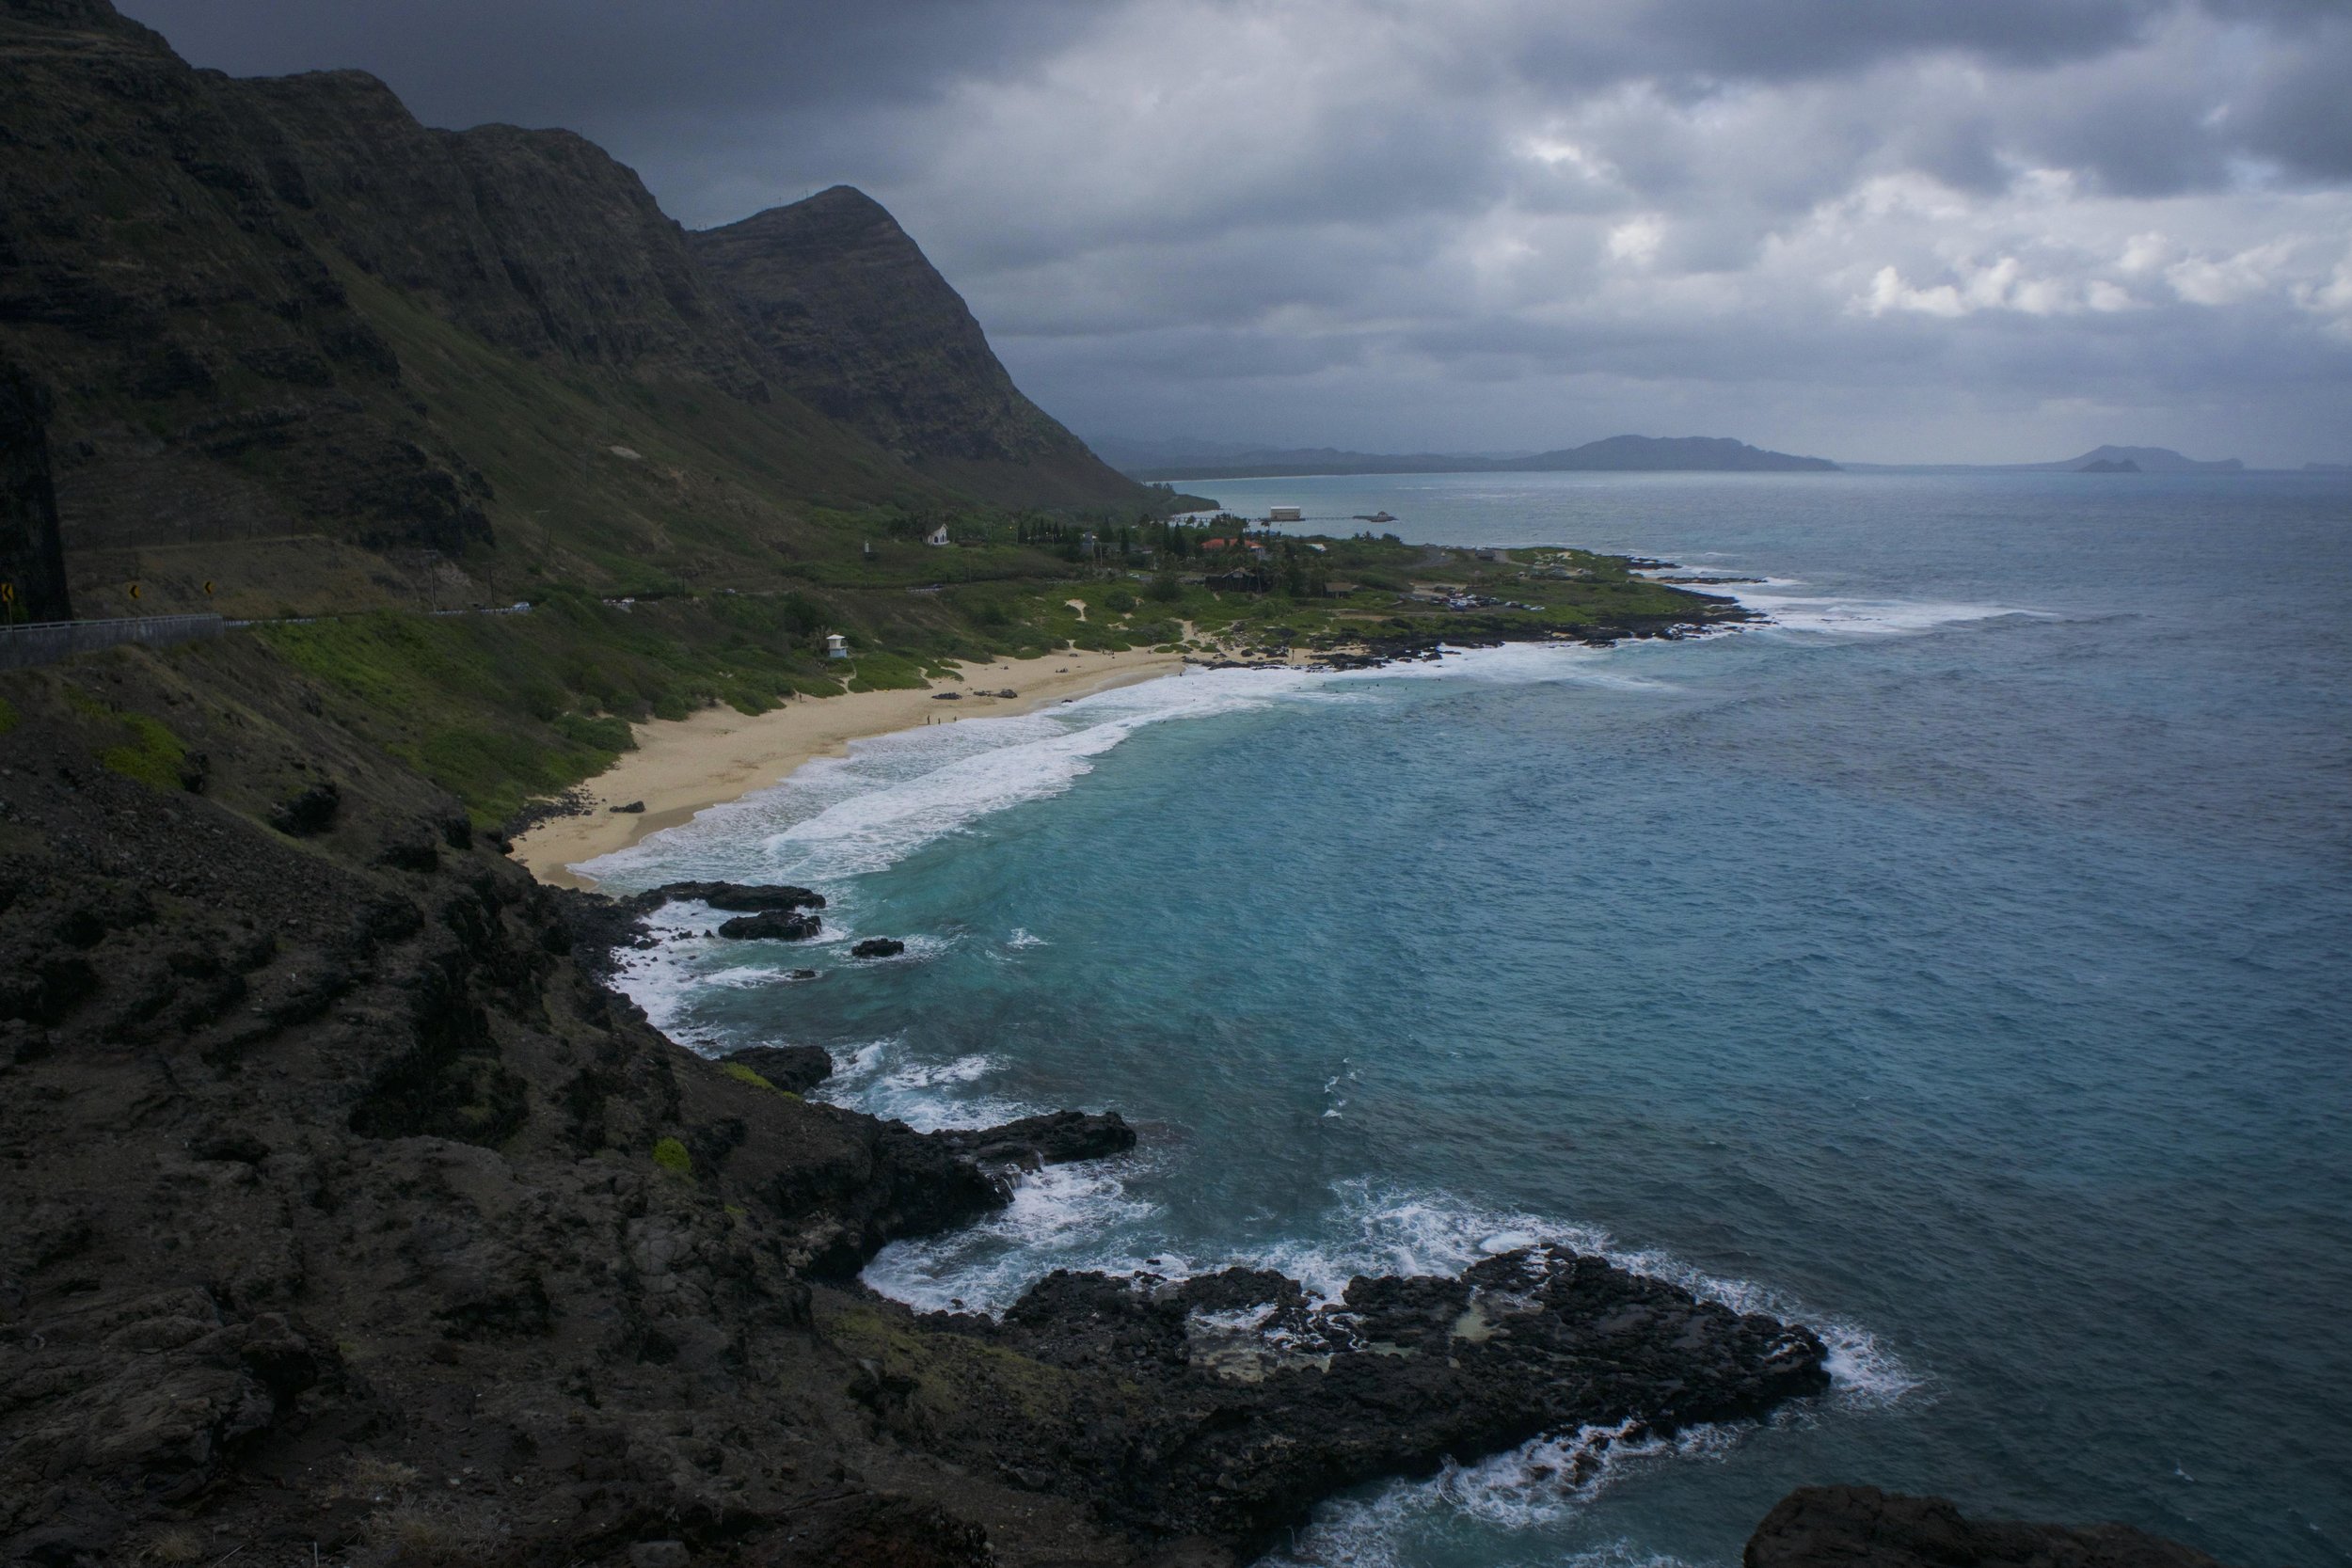  East side drive near Diamond Head. White sand beaches are nice, but the dramatic transition between mountains and ocean is what will always remind me of this place. 